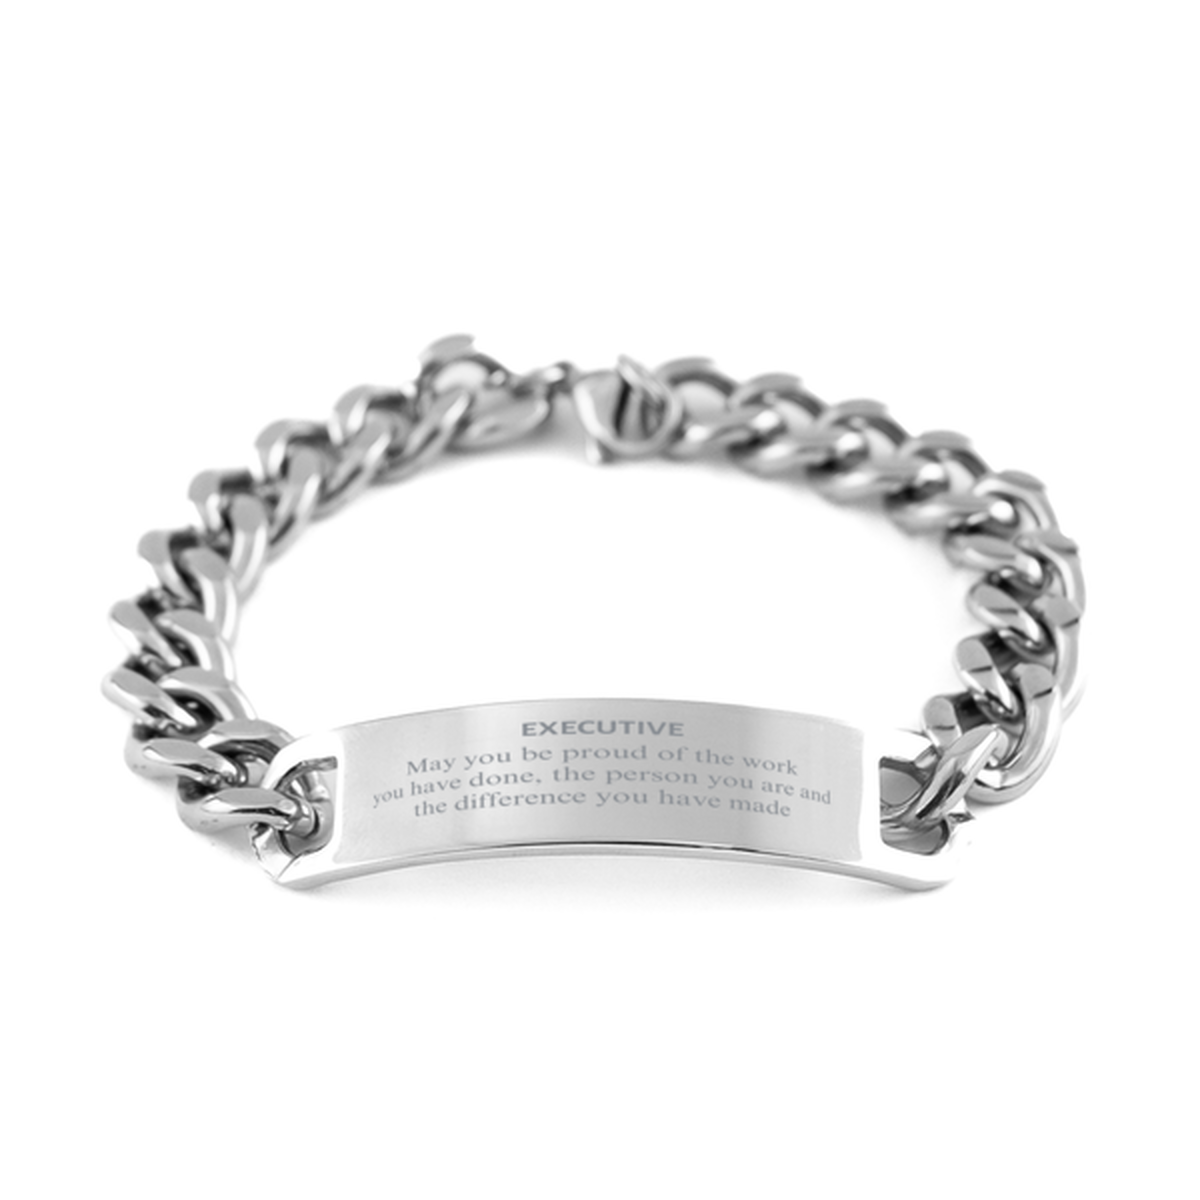 Executive May you be proud of the work you have done, Retirement Executive Cuban Chain Stainless Steel Bracelet for Colleague Appreciation Gifts Amazing for Executive